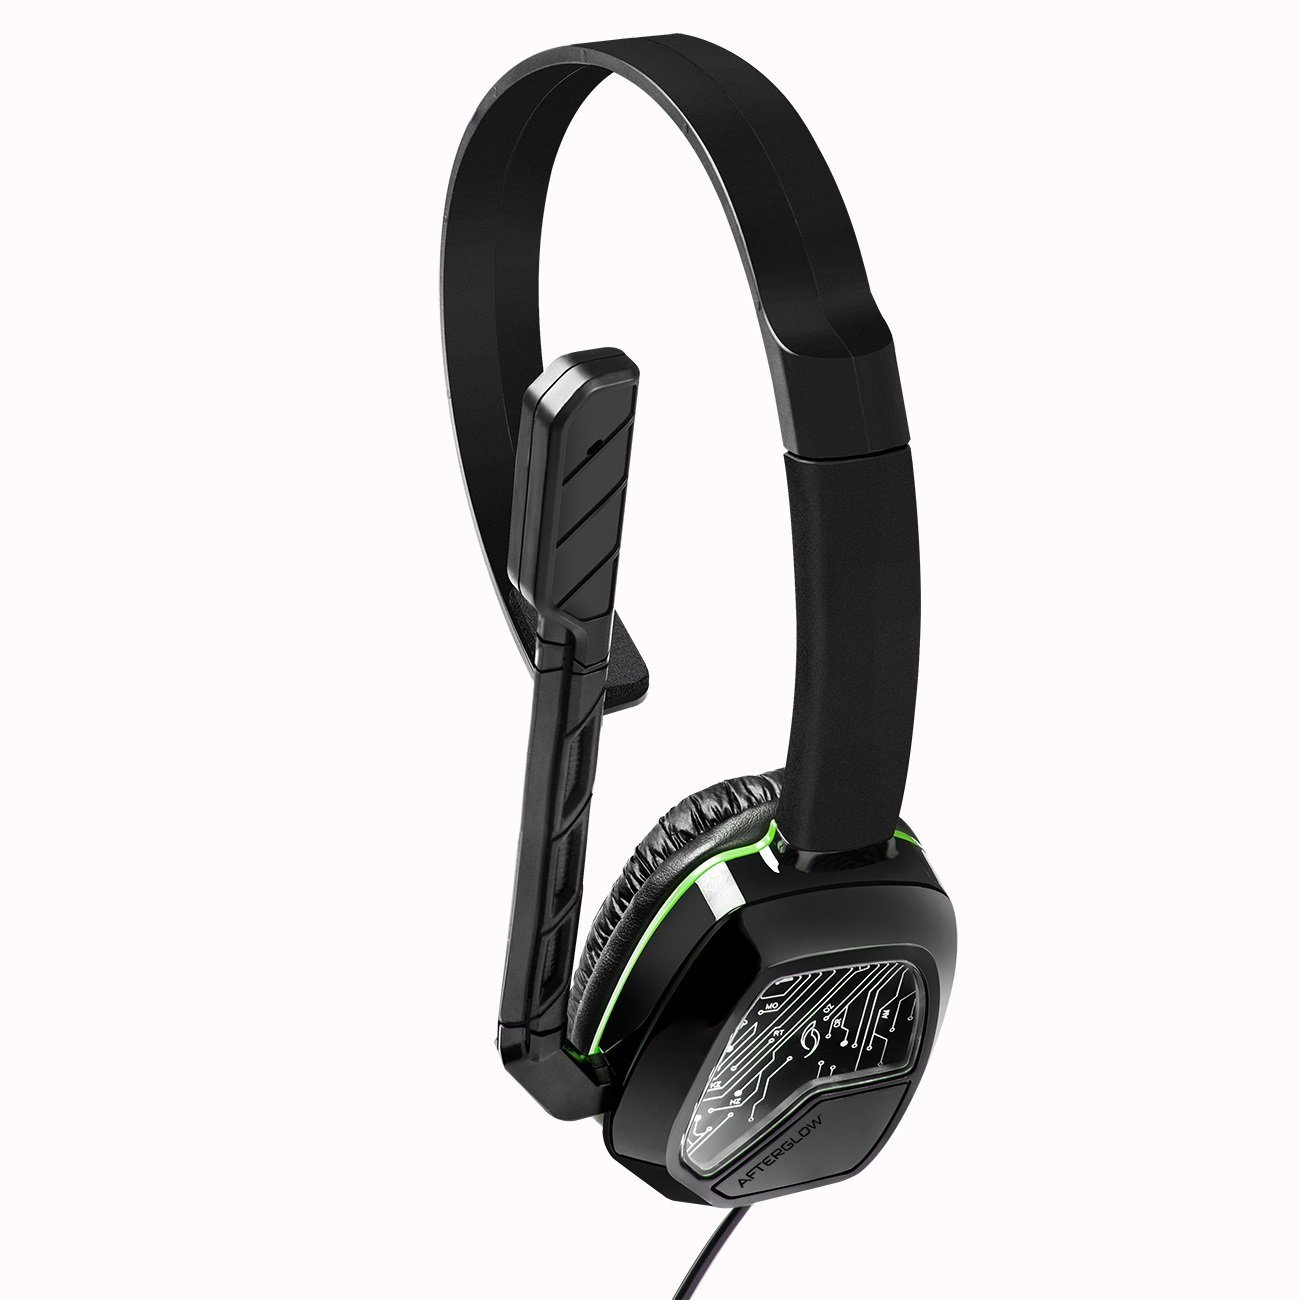 PDP LvL30 Wired Chat Headset for Xbox One Review